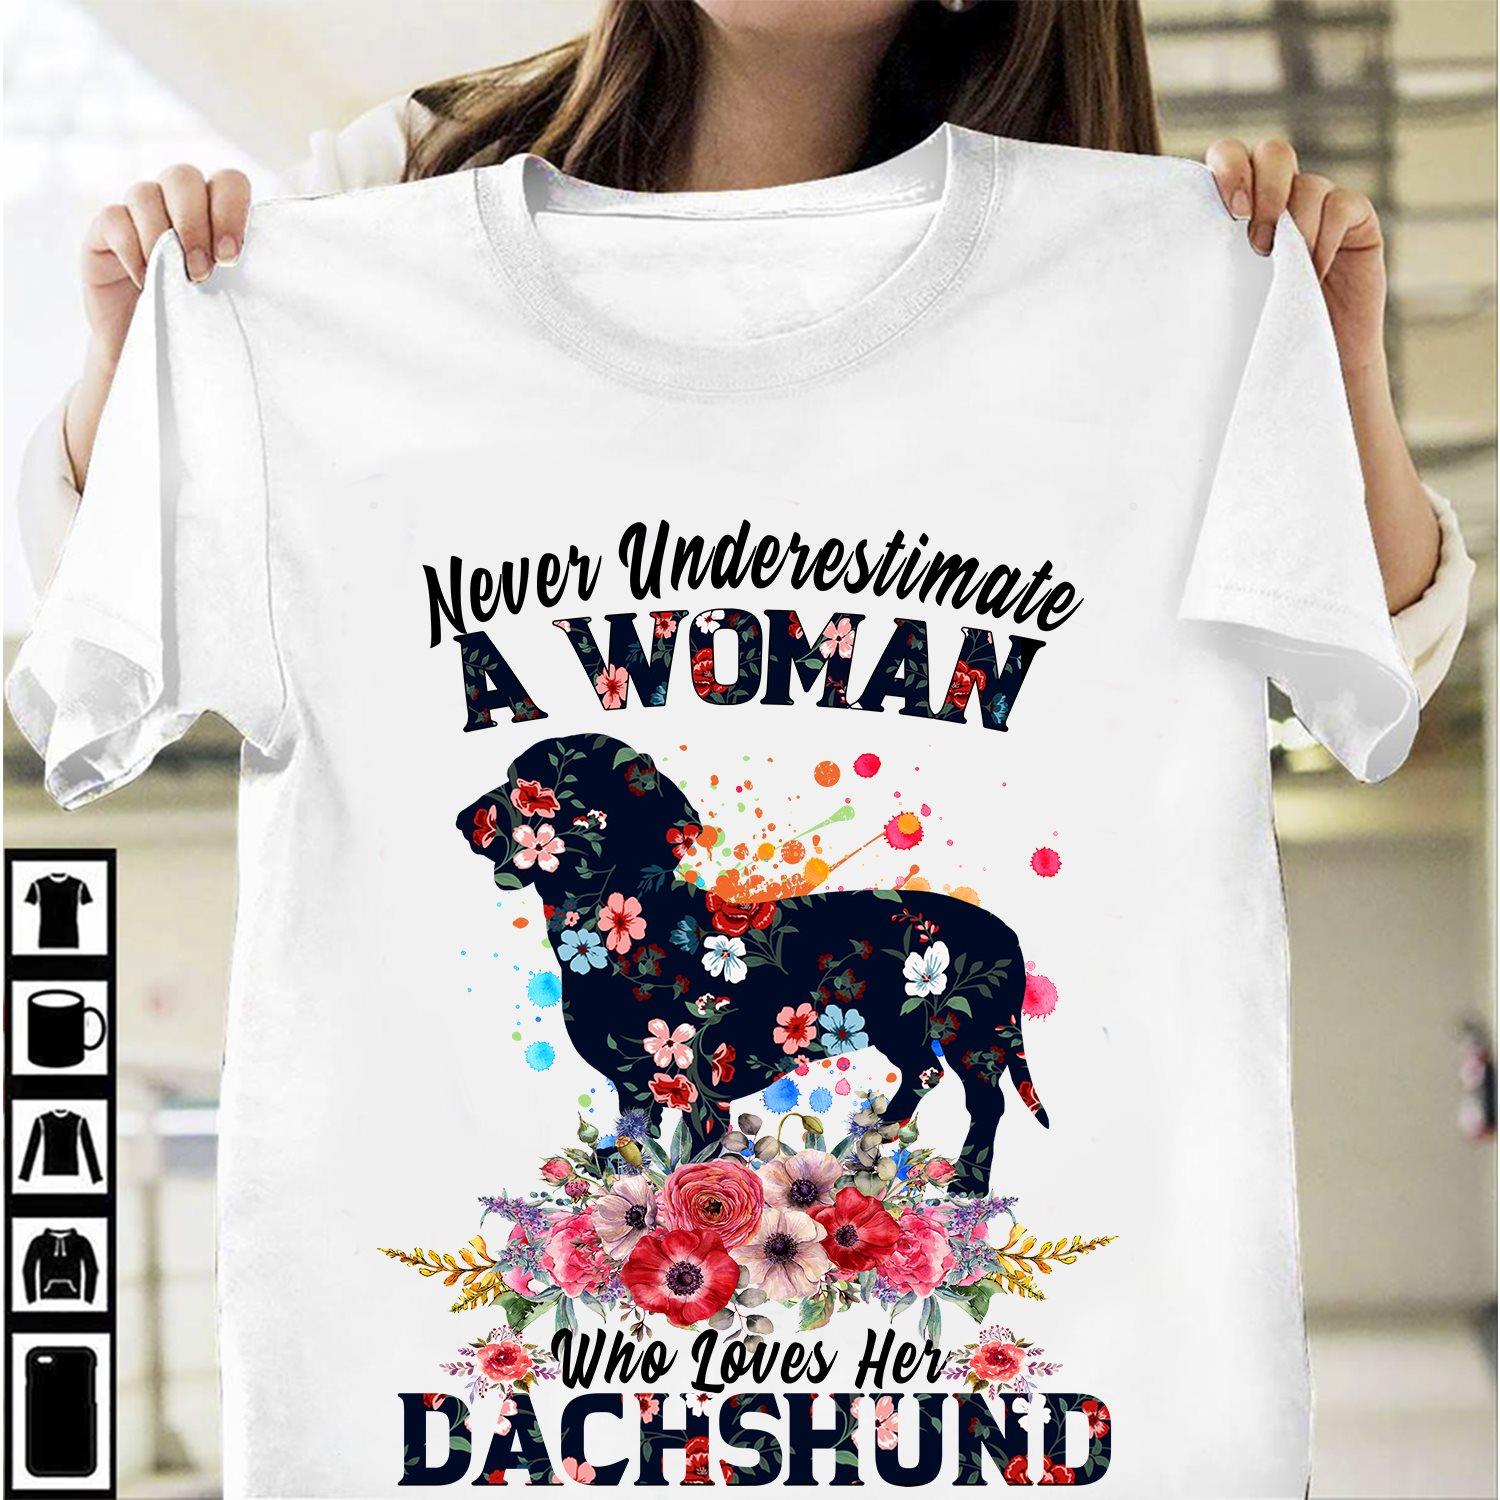 Never Underestimate A Woman Who Loves Her Dachshund Shirt